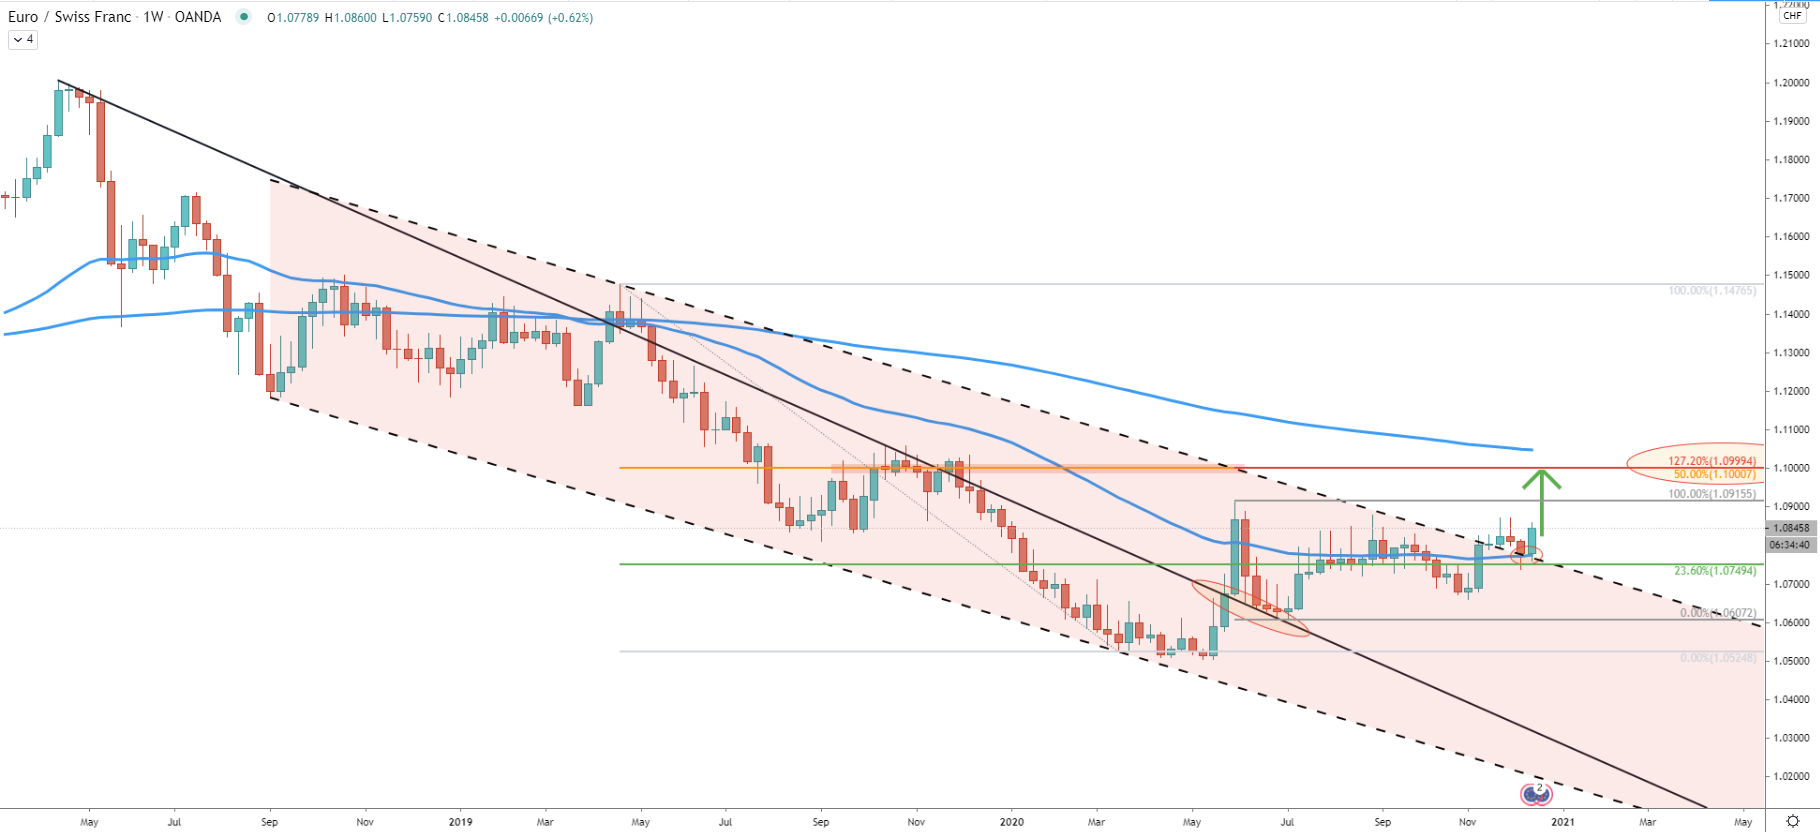 EUR/CHF Weekly Technical Analysis 18 Dec 2020